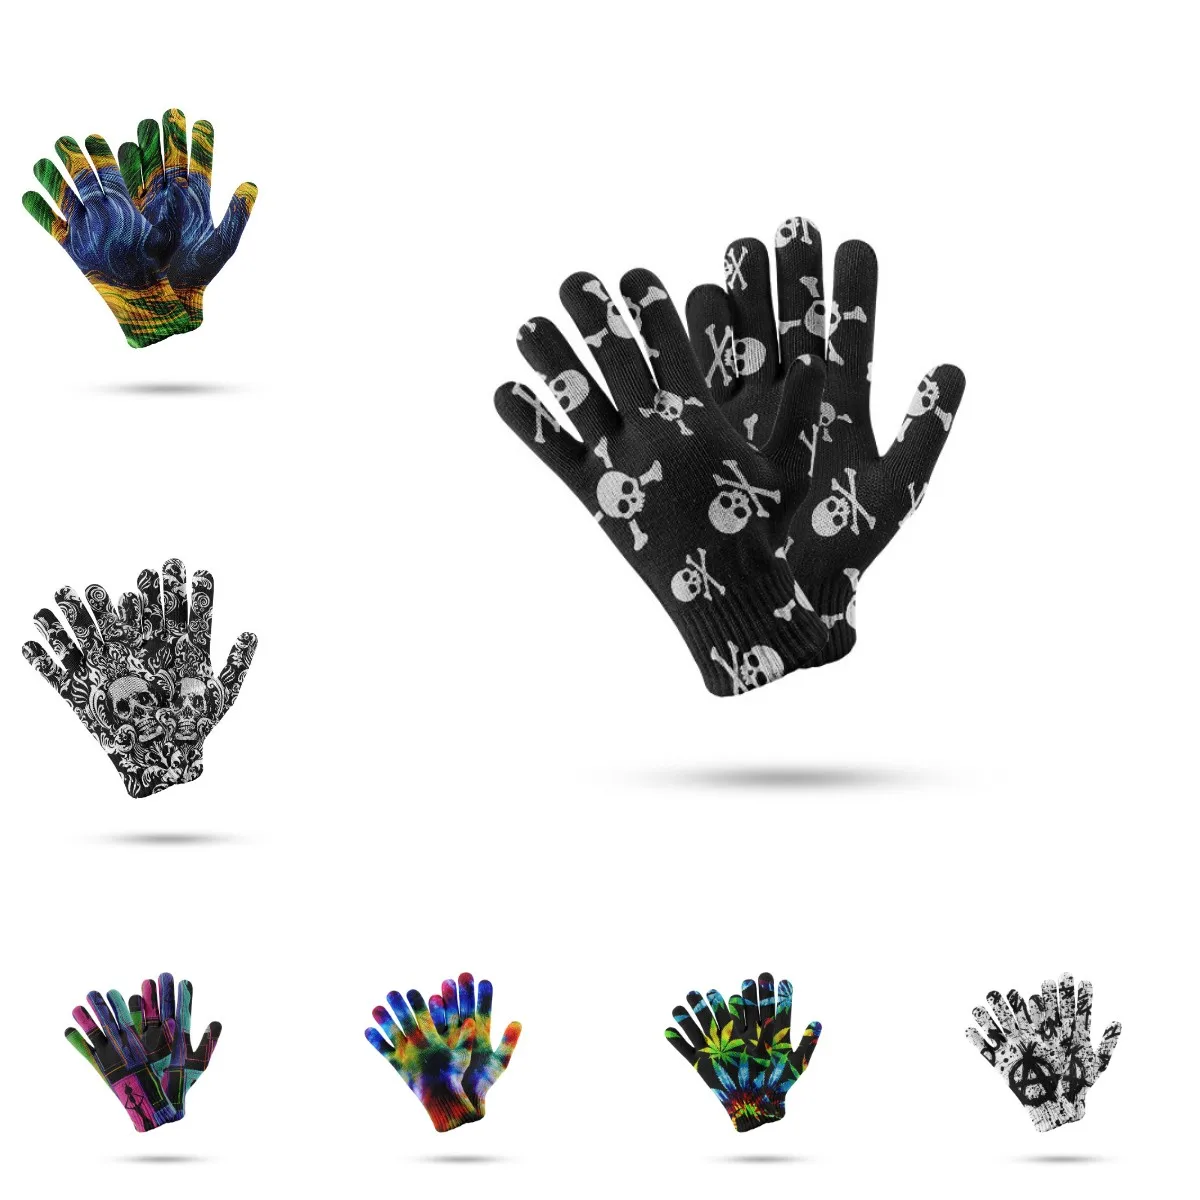 New Gloves For Men and Women Windproof Creative Funny Hip-hop Series Riding Writing Five-finger Touch Screen Gloves